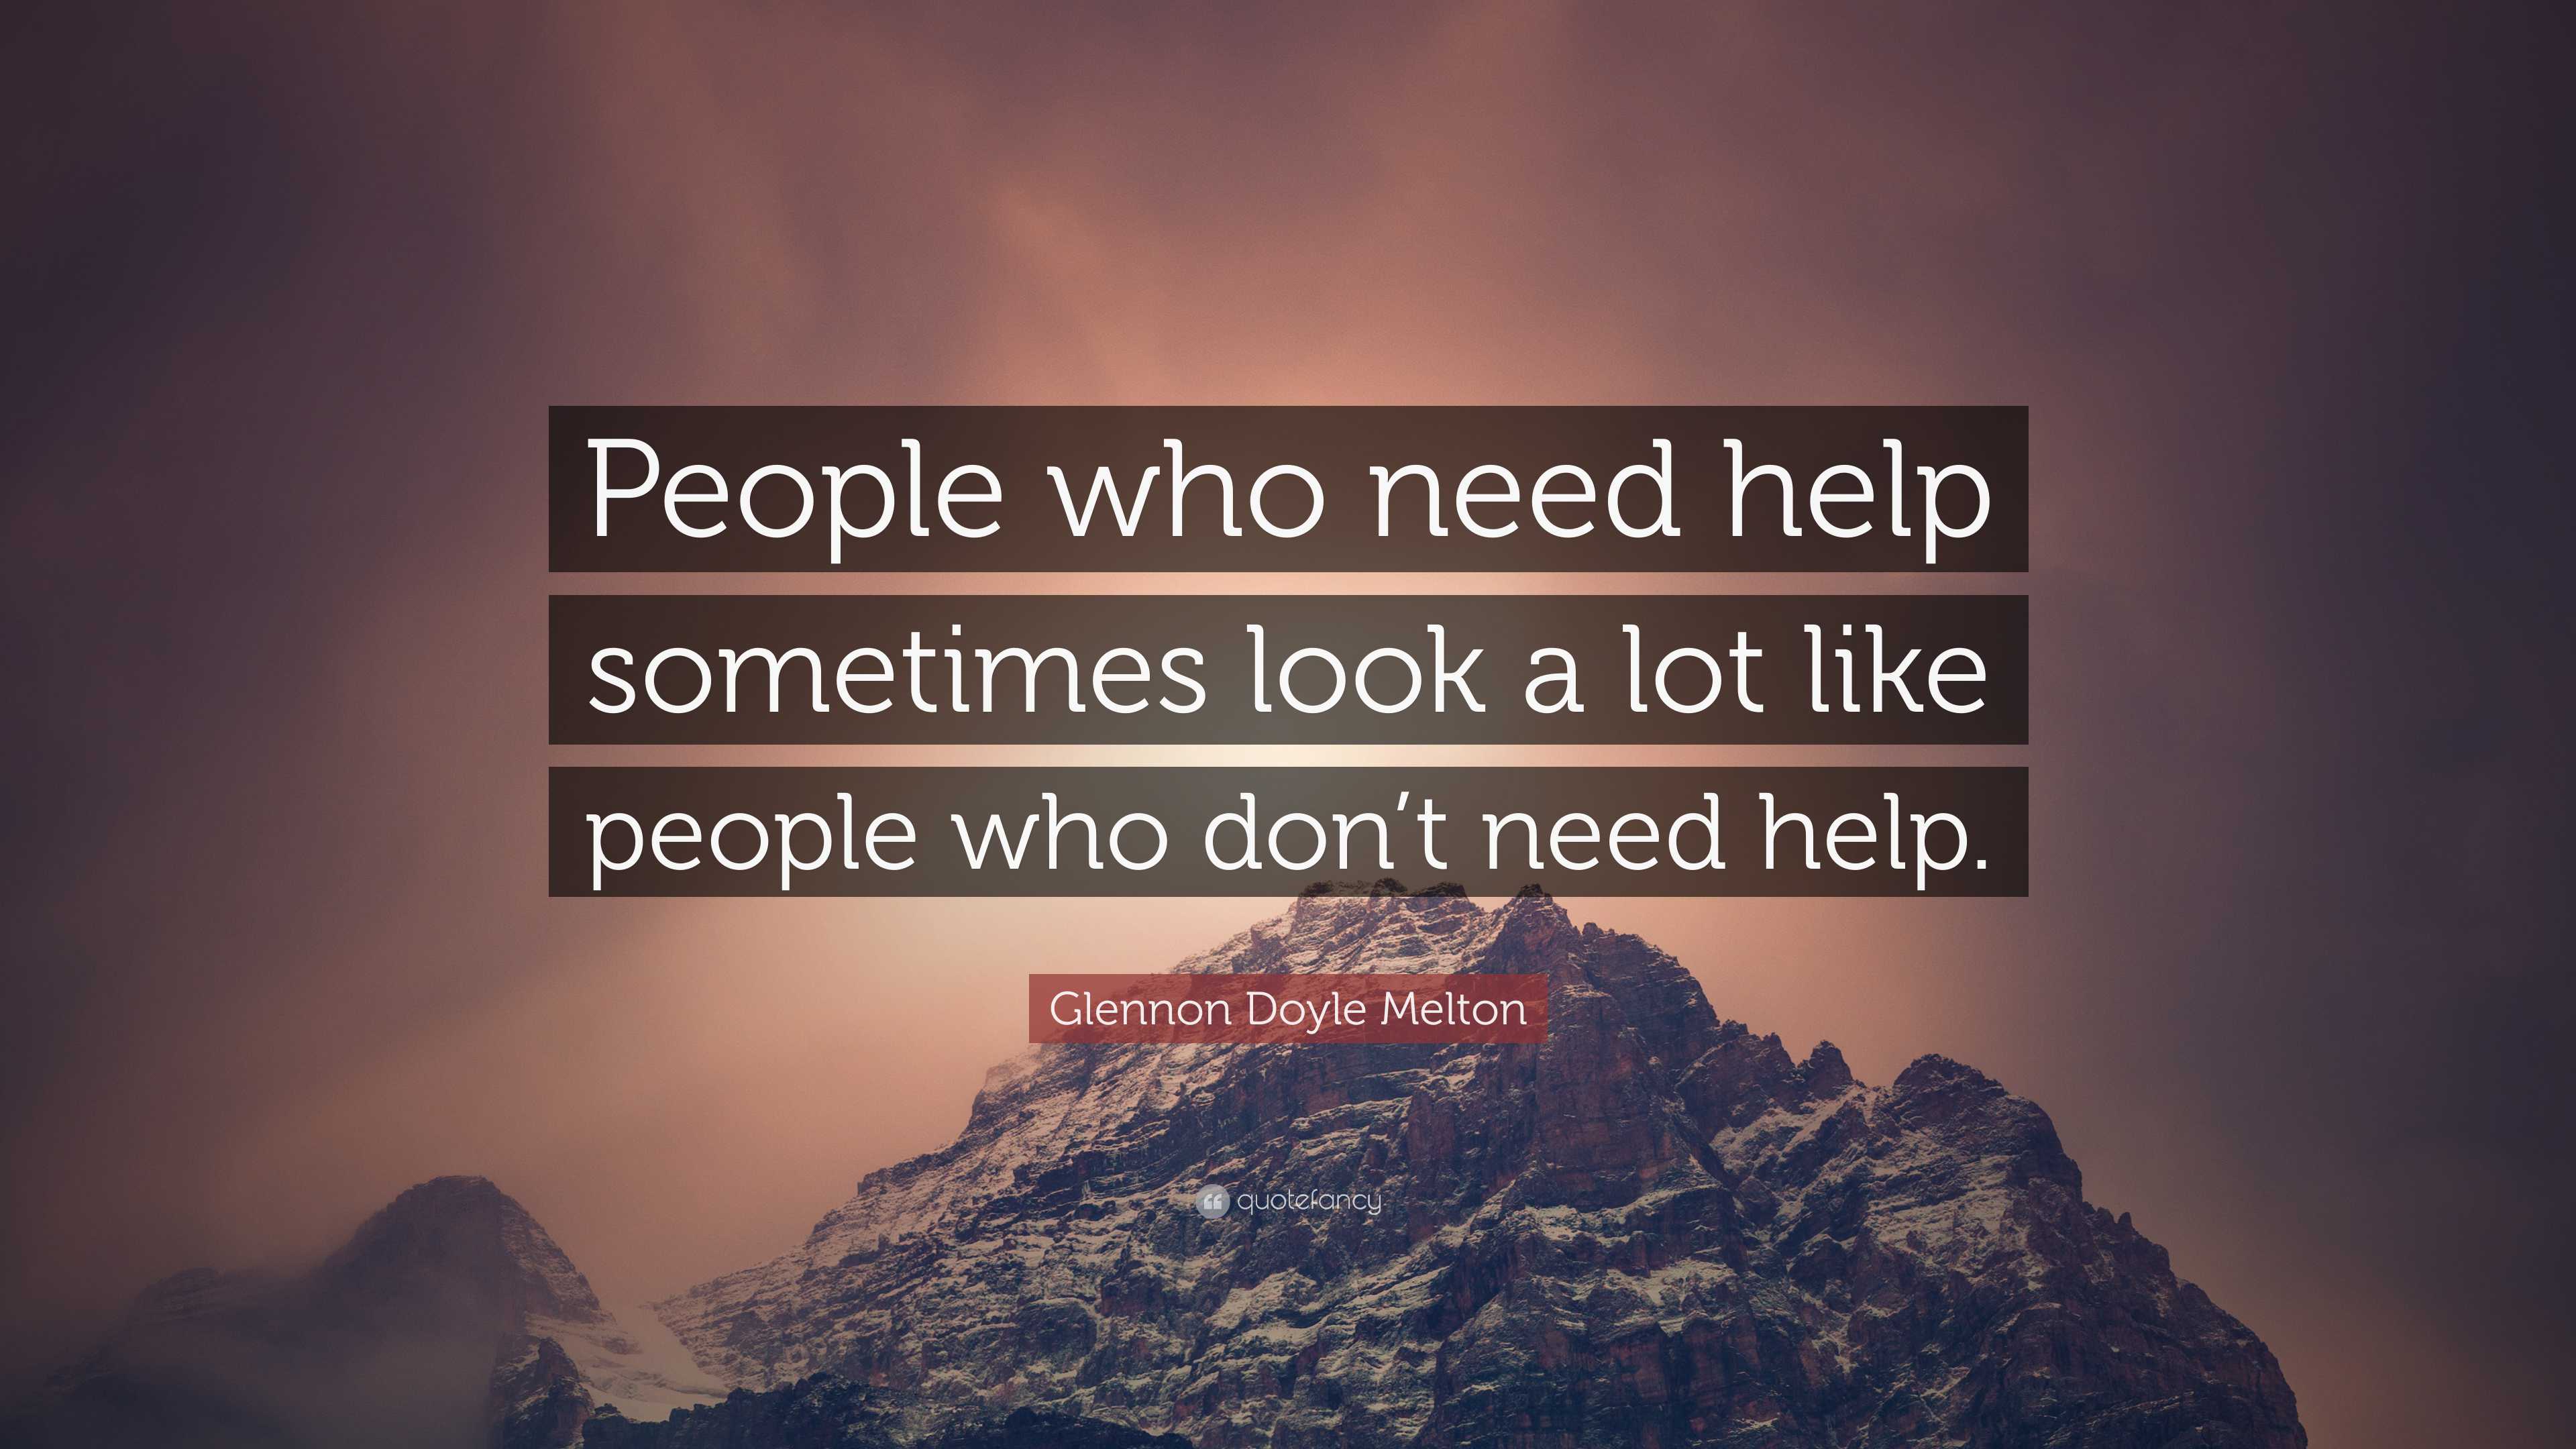 Glennon Doyle Melton Quote: “People who need help sometimes look a lot ...